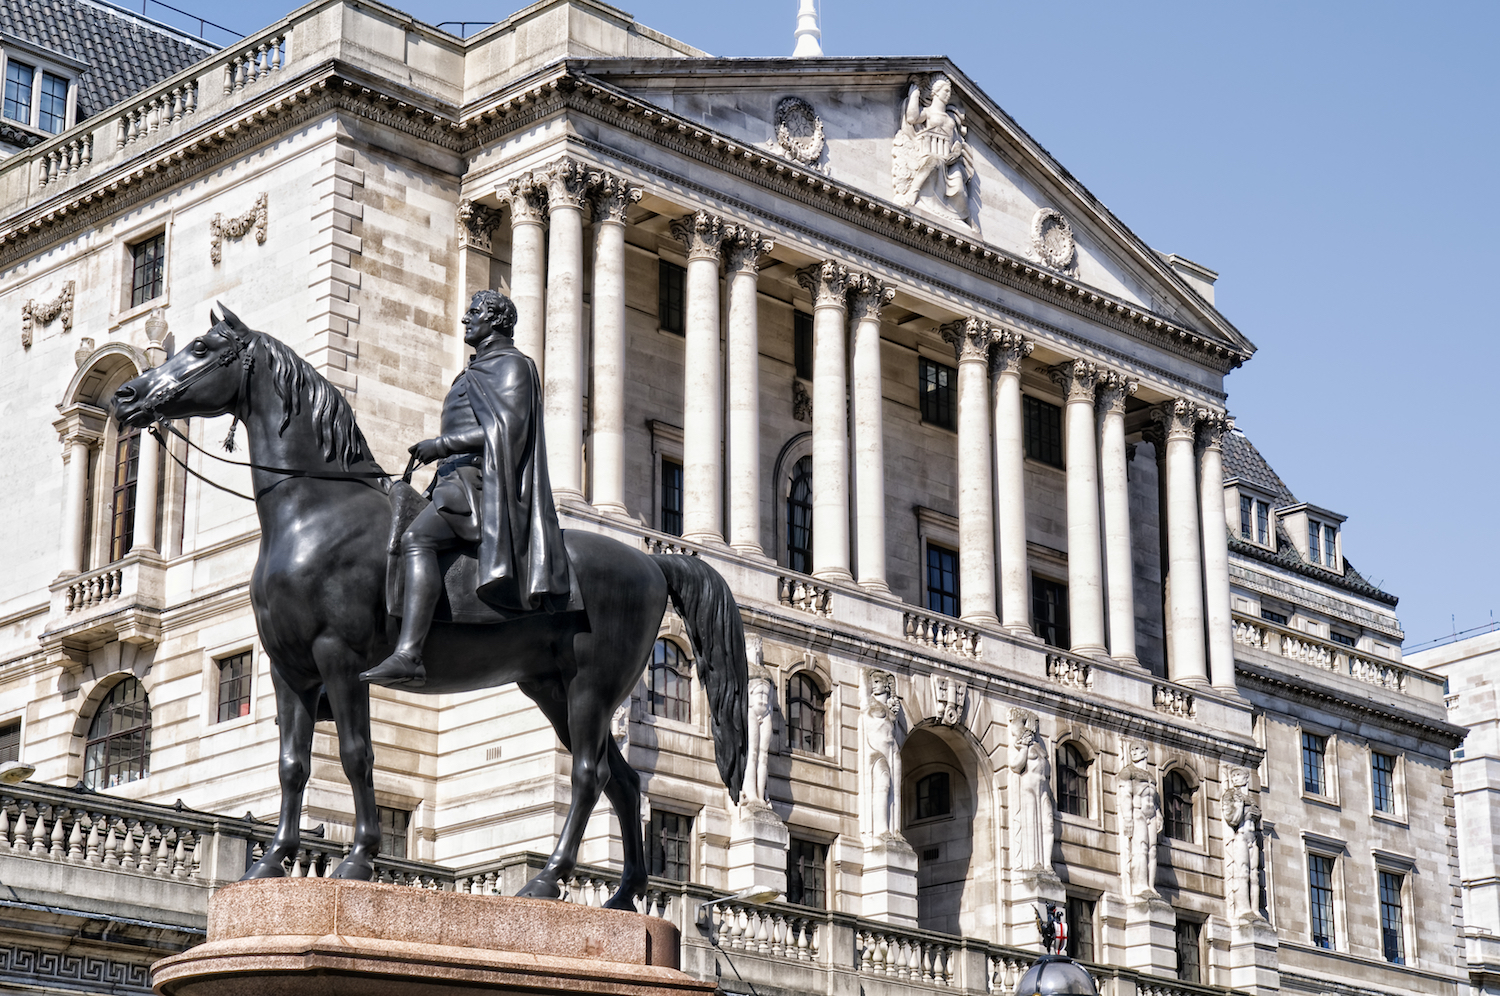 Bank-of-england’s-stablecoin-ruling-targets-financial-stability,-exec-says